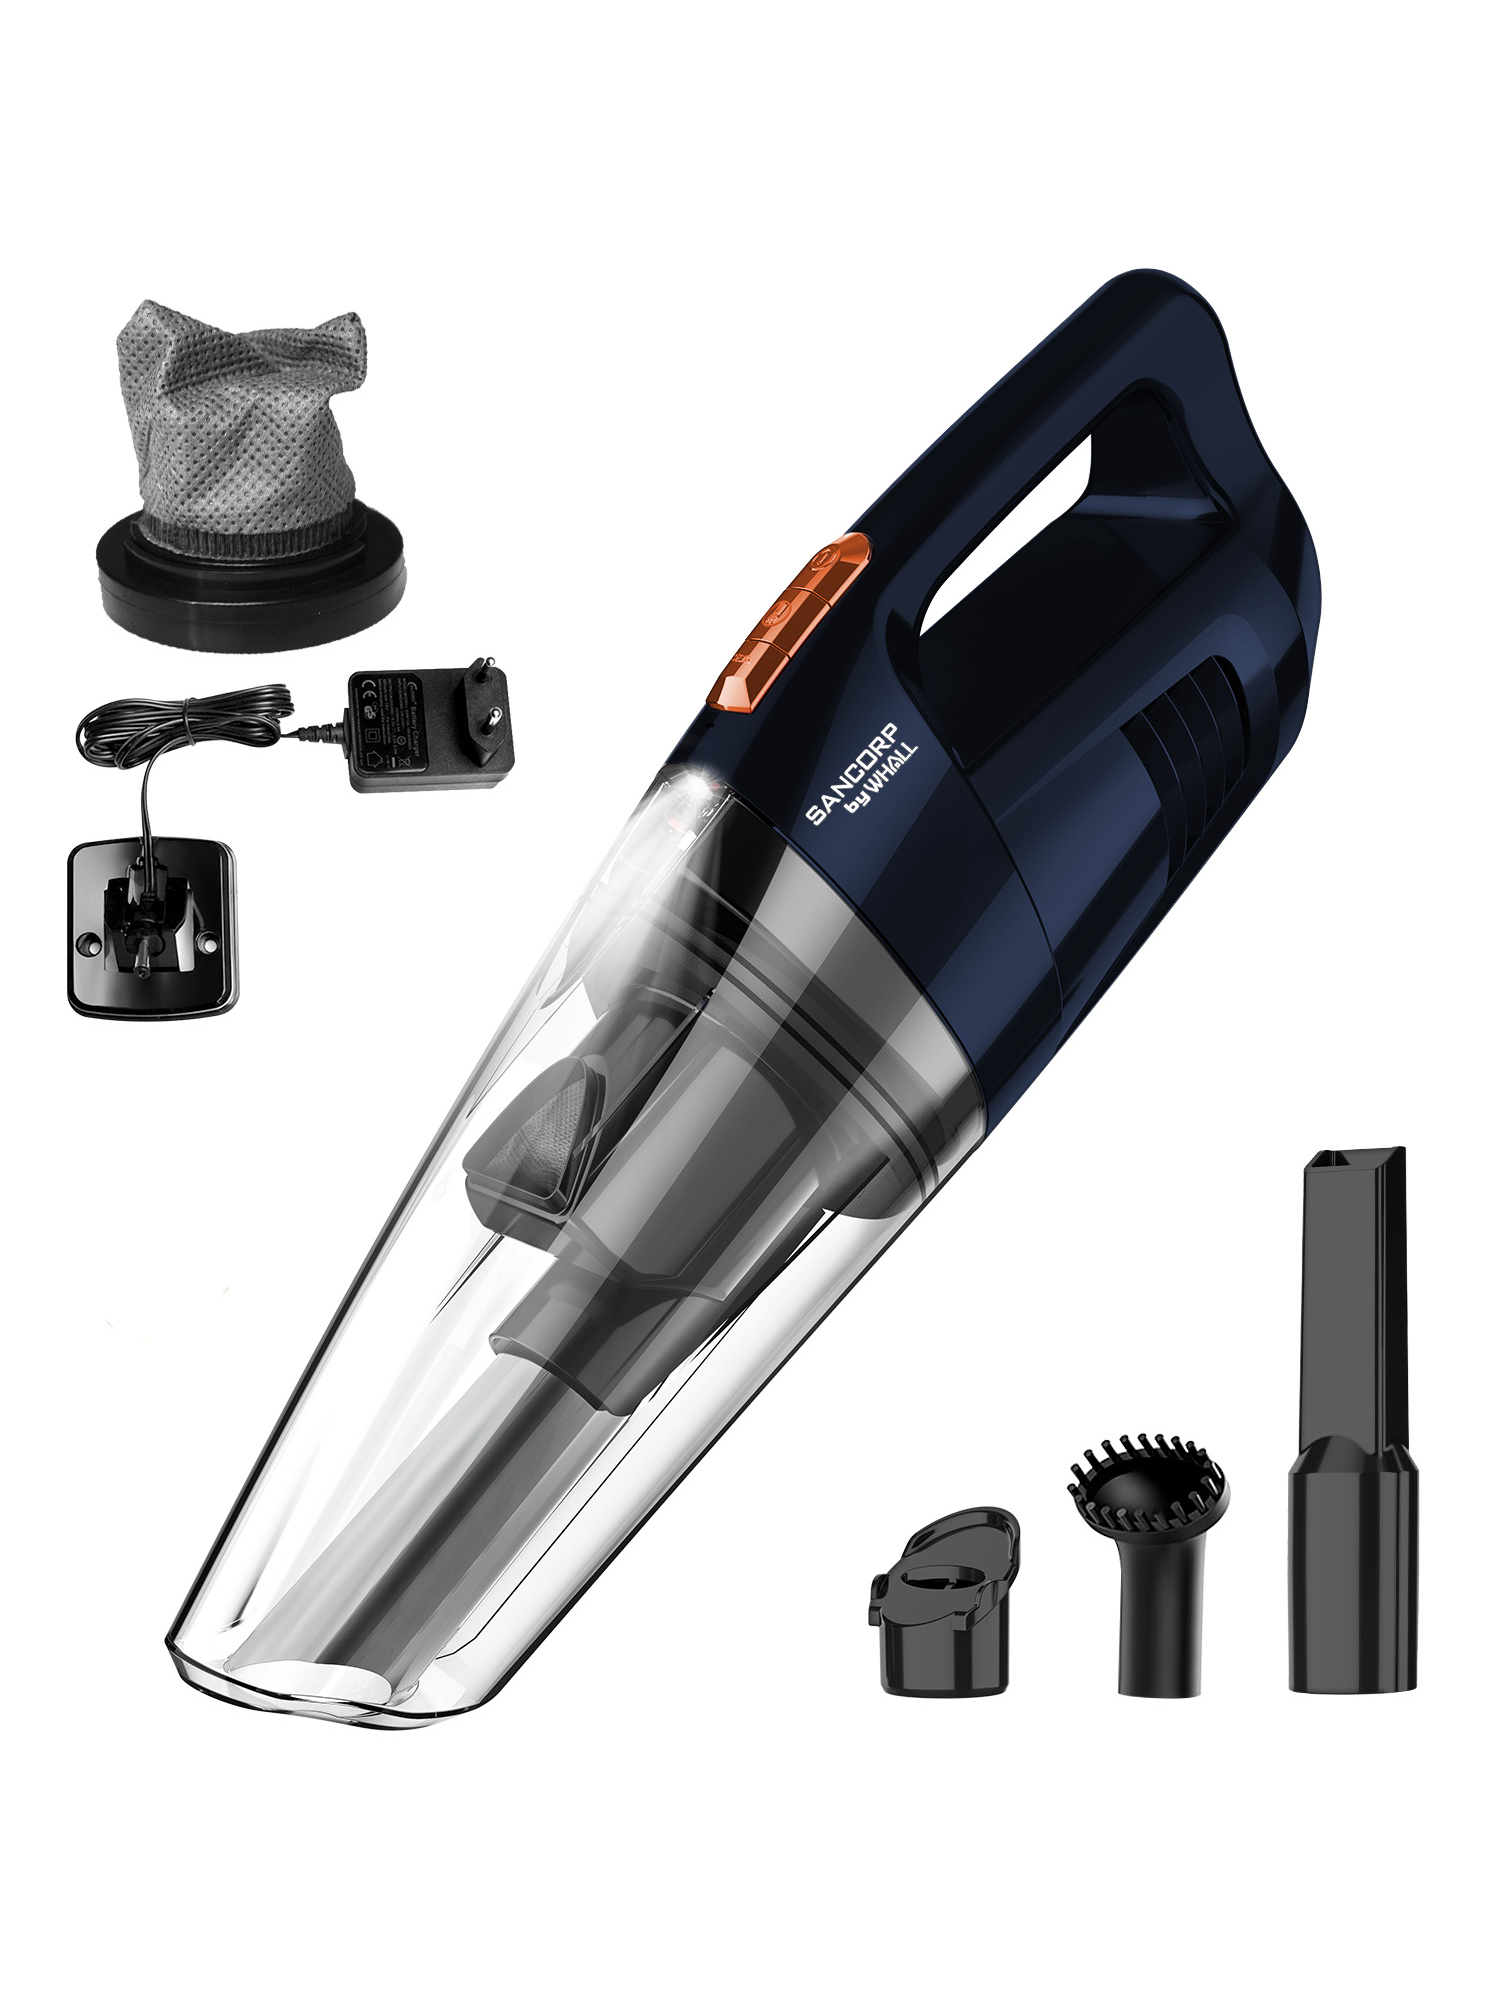 Whall Mini Portable Cordless Handheld Vacuum with 8500 PA